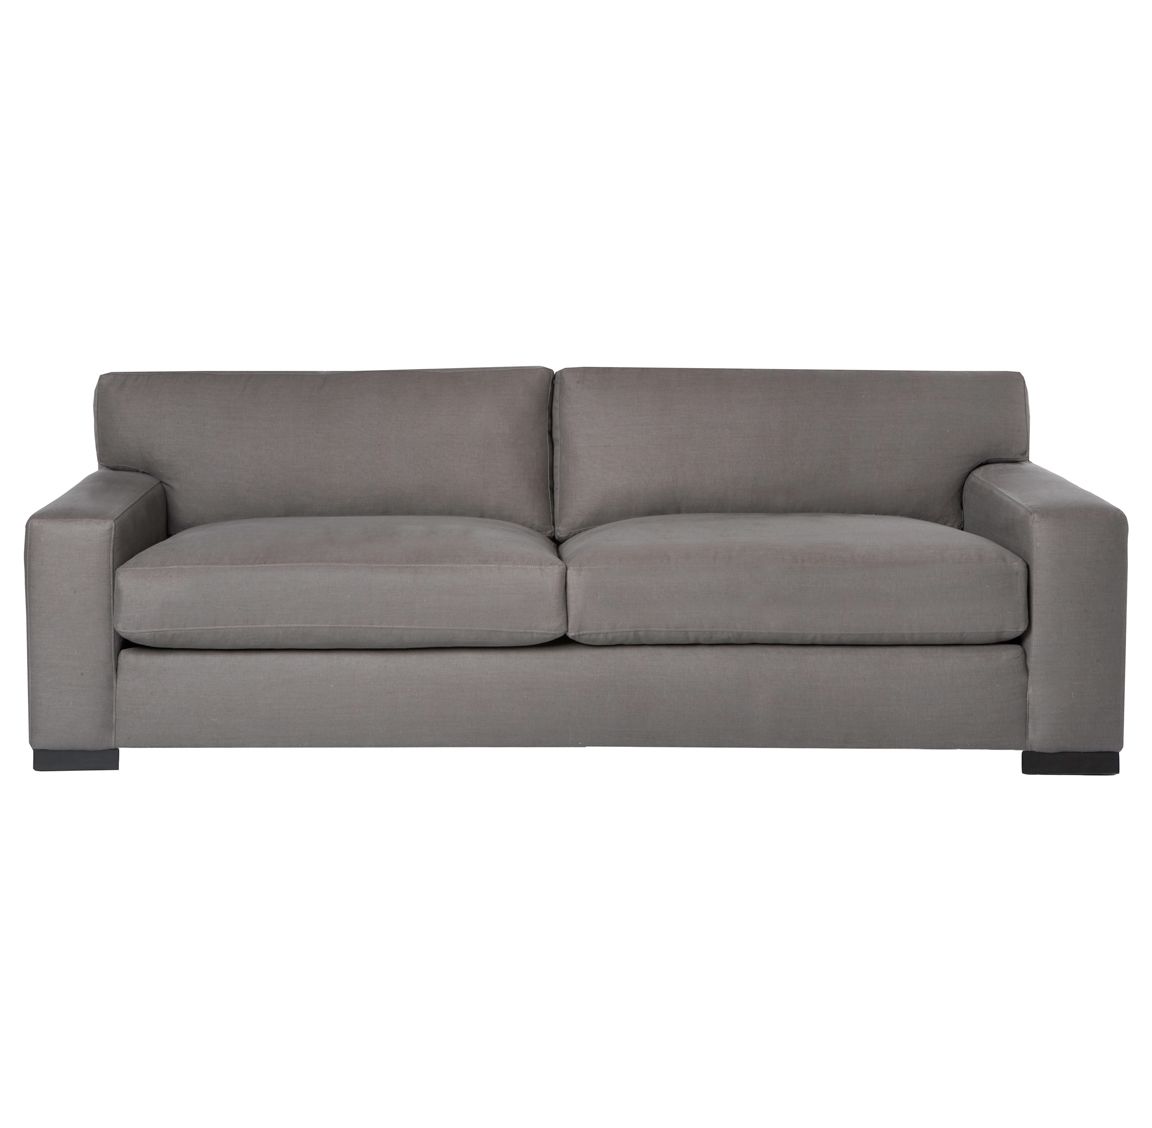 Cisco Brothers Loft Masculine Modern Classic Grey Steel Linen Feather Down Sofa - 84 Inch | Kathy Kuo Home